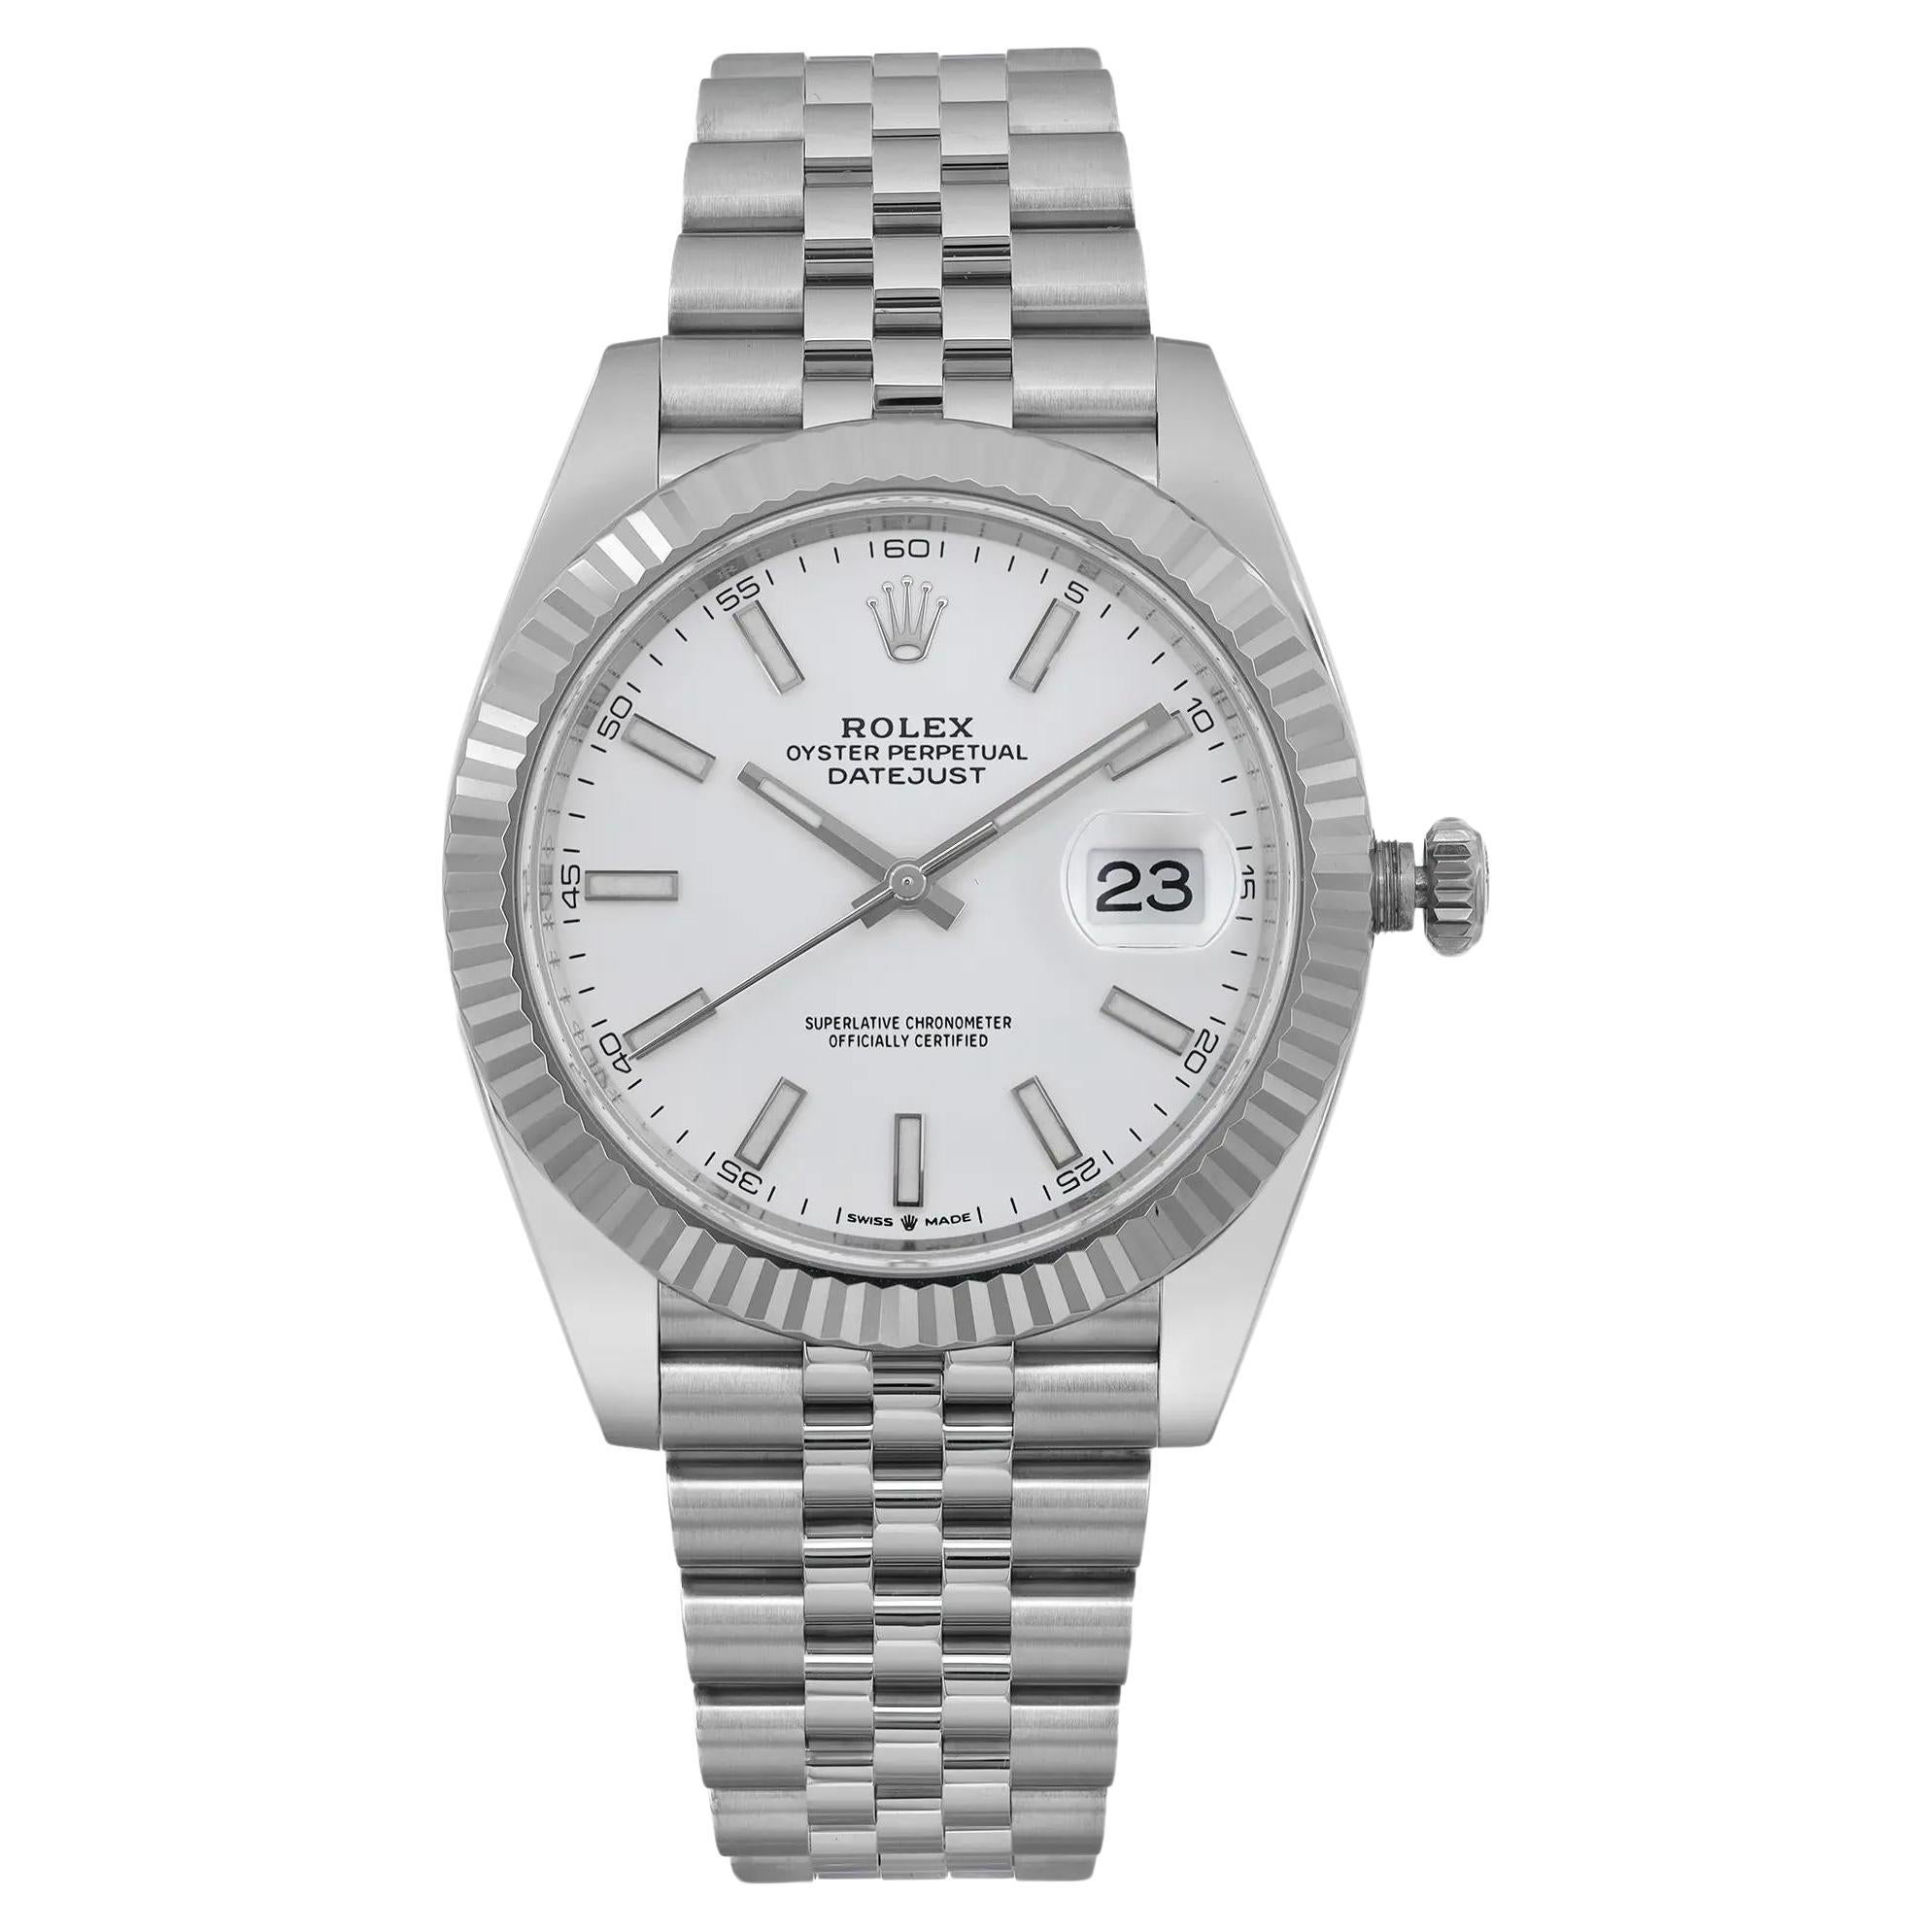 NEW Rolex Datejust 41 Steel 18K White Gold White Dial Men Automatic Watch 126334 For Sale